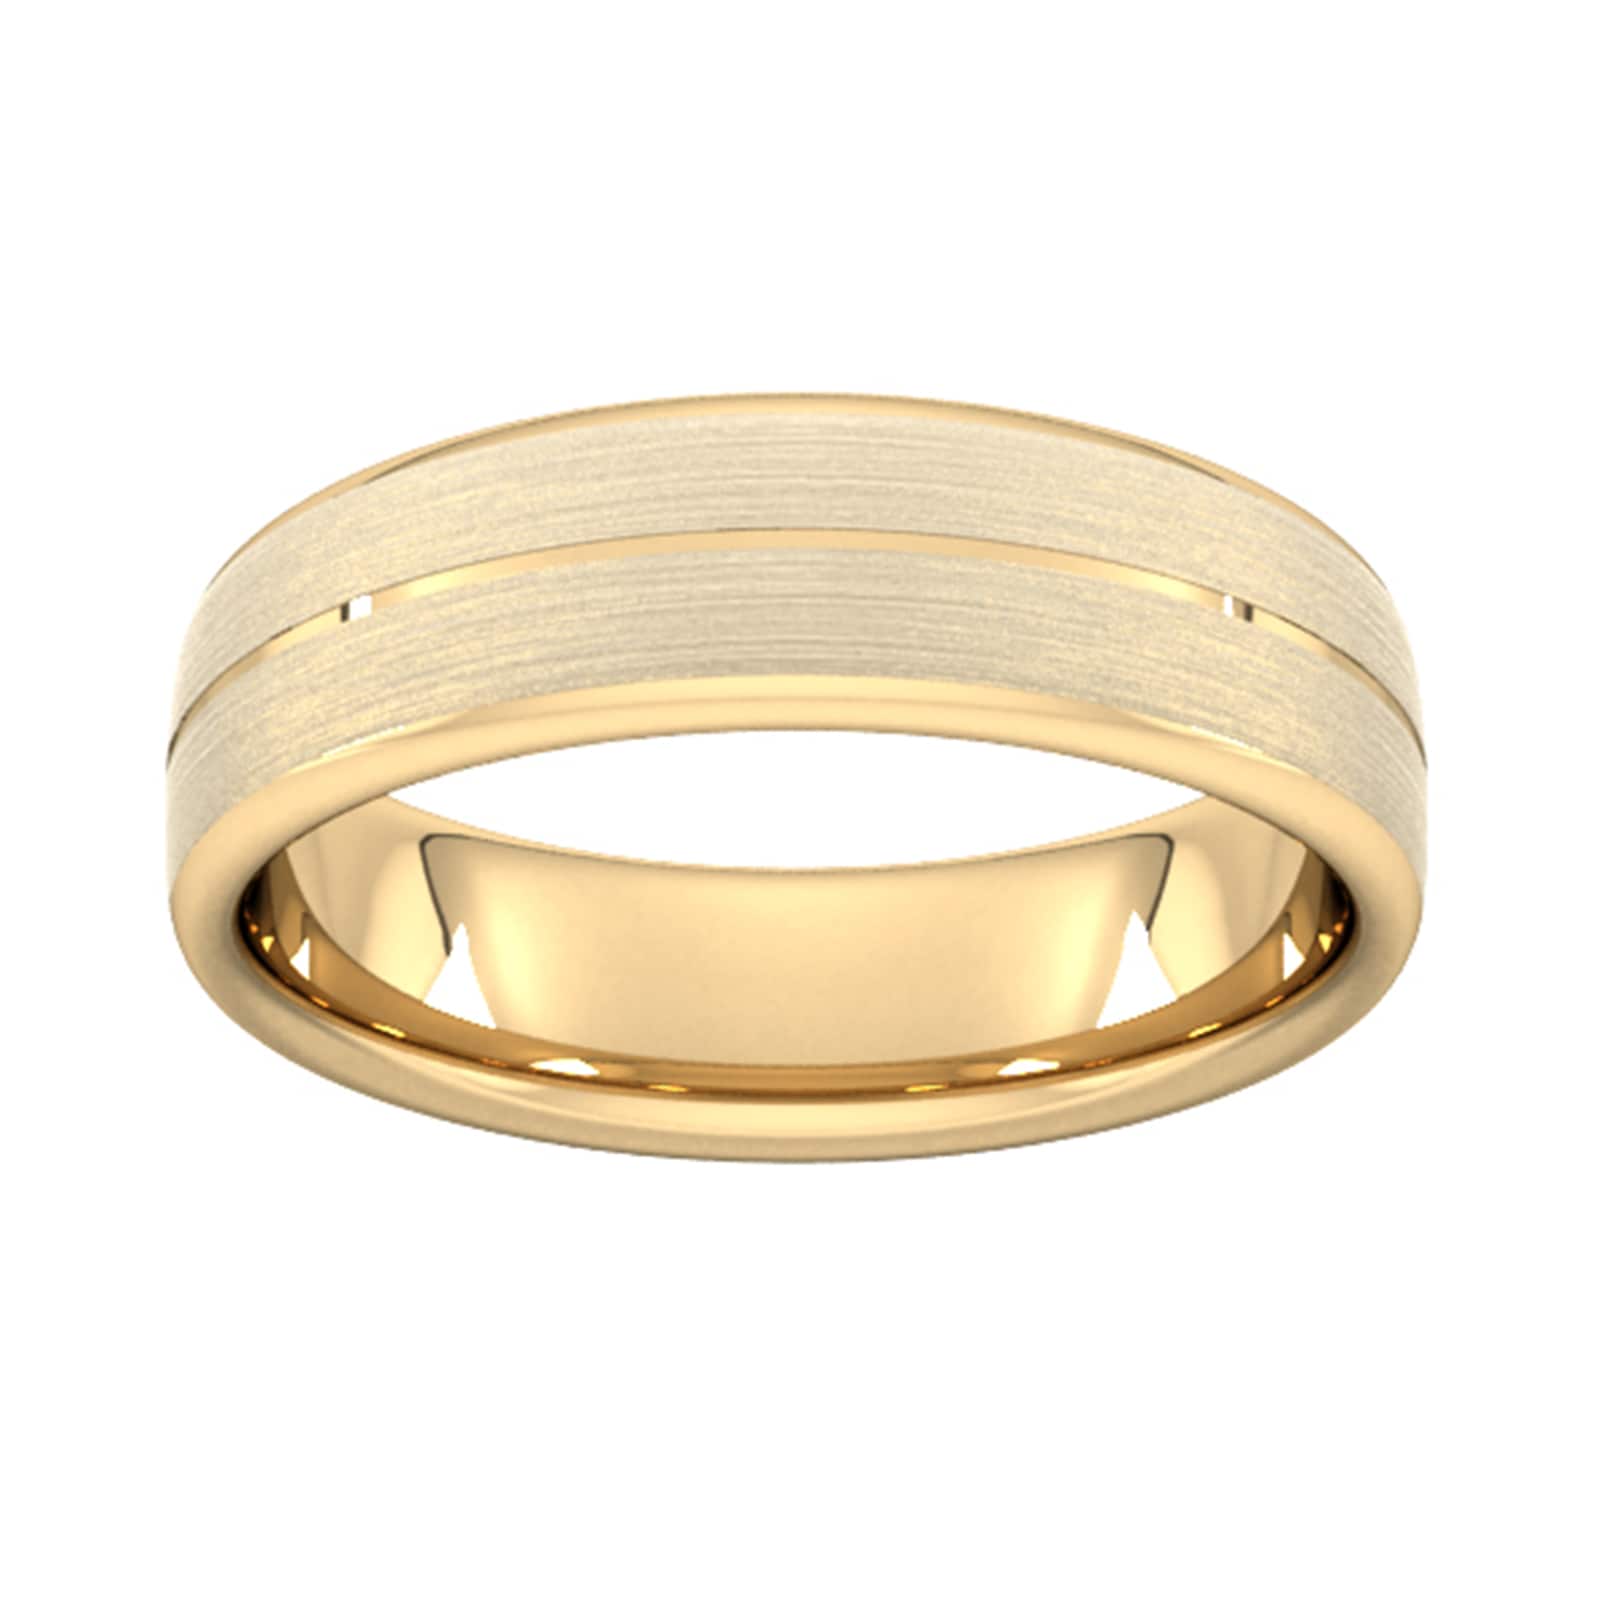 6mm Traditional Court Heavy Centre Groove With Chamfered Edge Wedding Ring In 18 Carat Yellow Gold - Ring Size Y